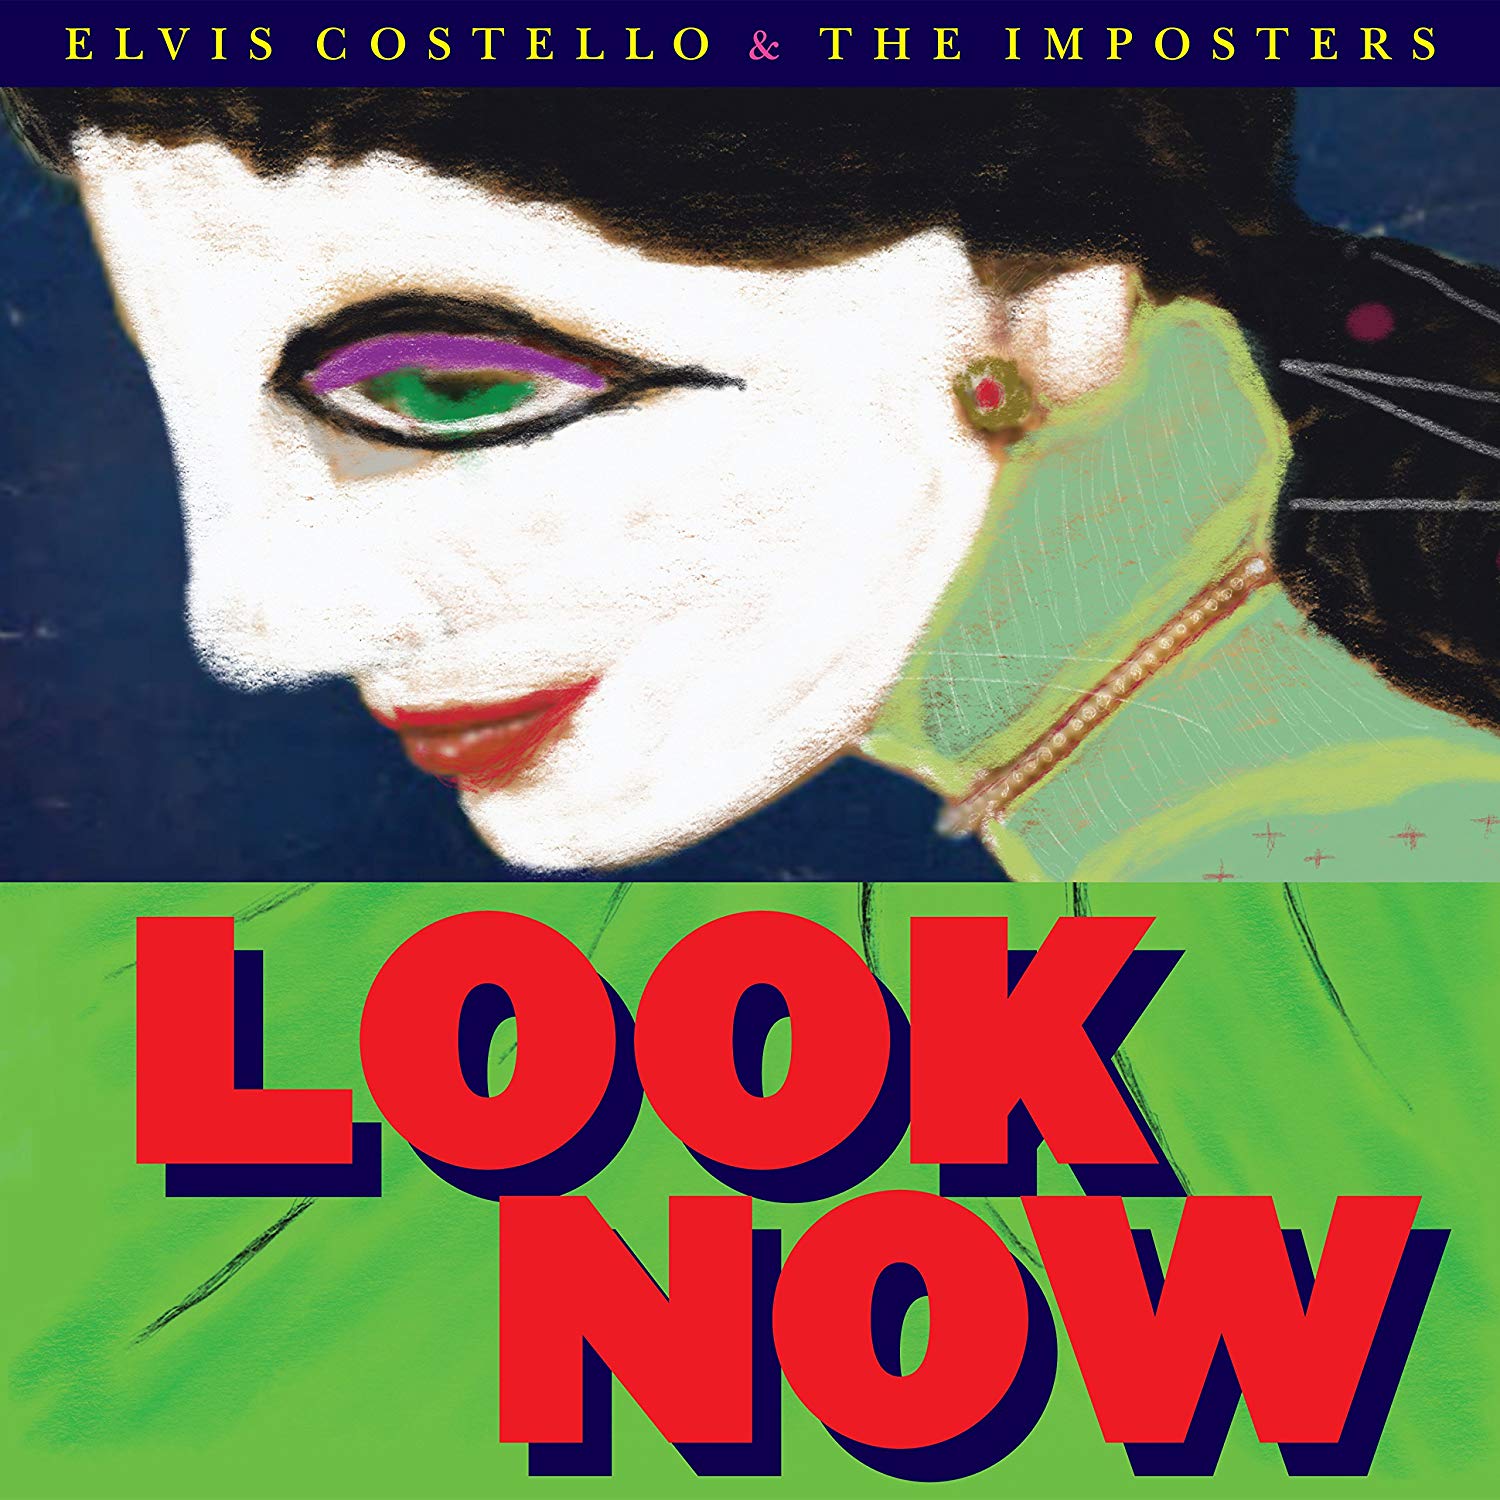 ELVIS COSTELLO & THE IMPOSTERS / エルヴィス・コステロ&ジ・インポスターズ / LOOK NOW (1CD)